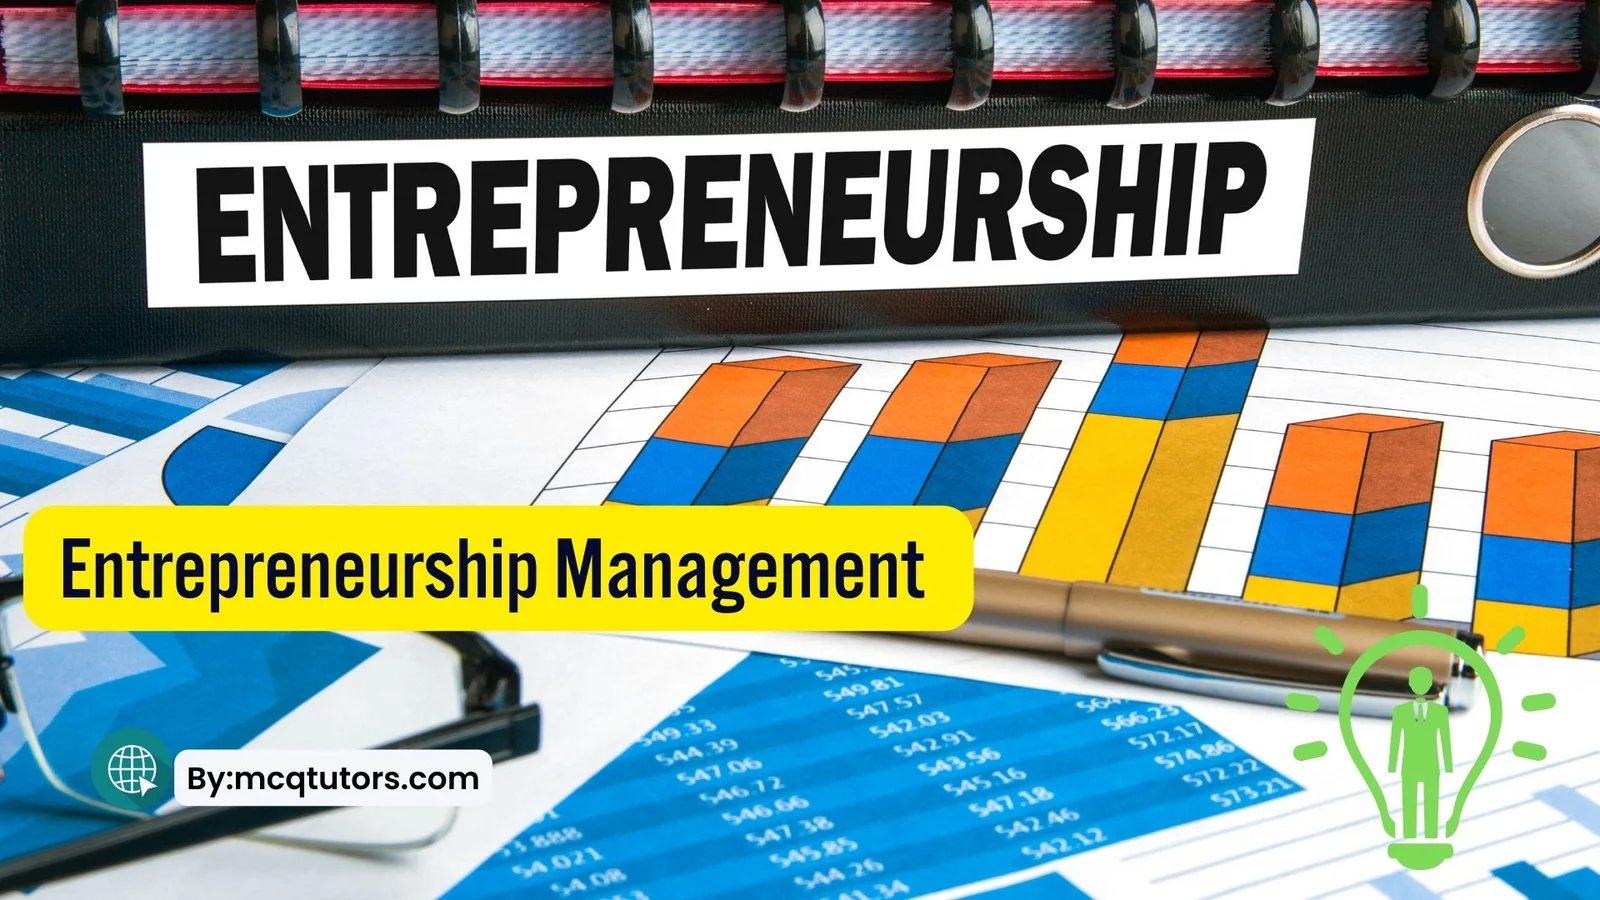 Entrepreneurship and small business management